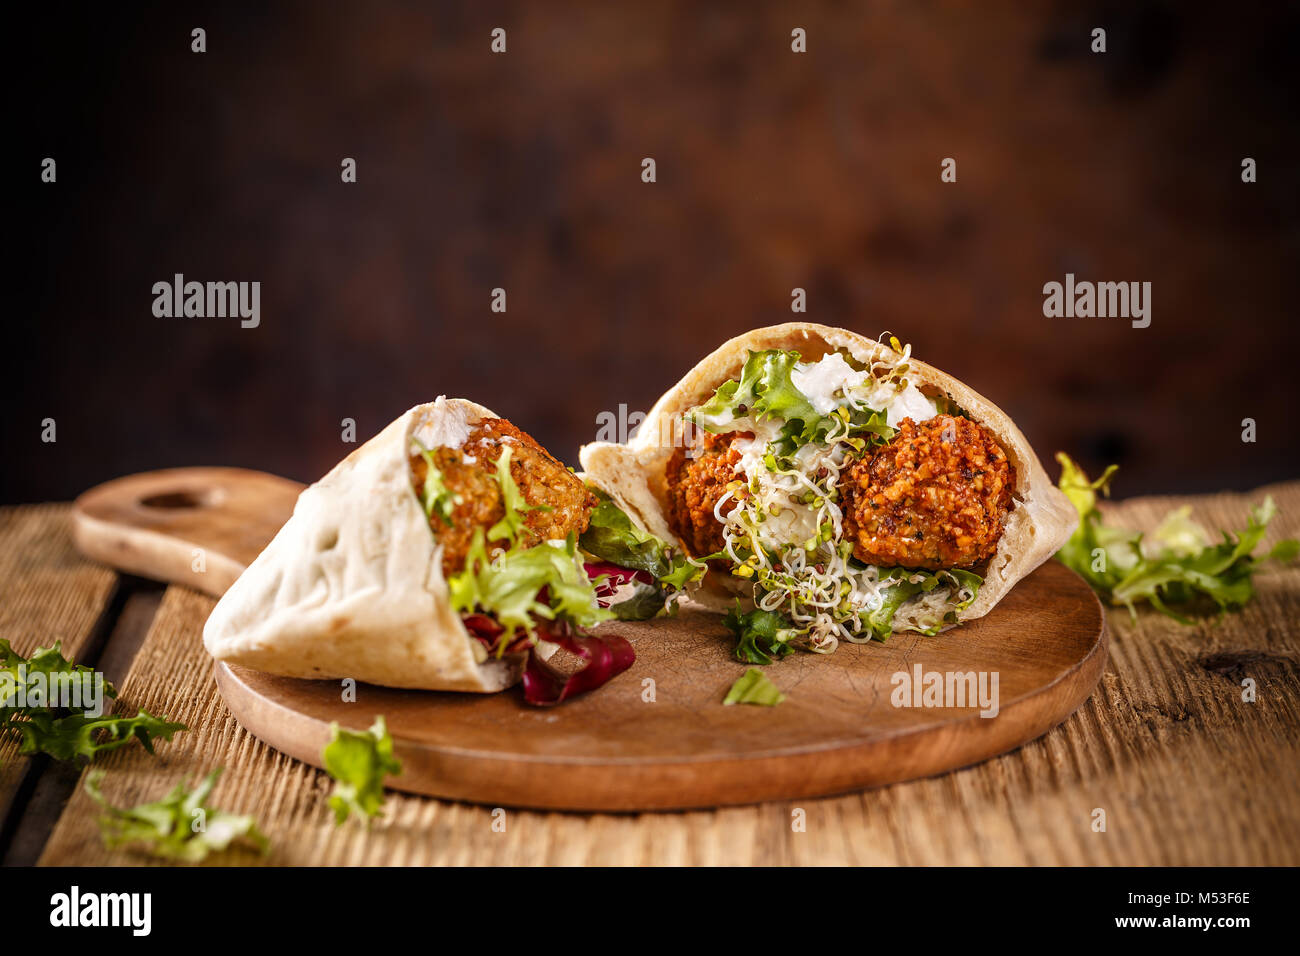 Falafel and fresh lettuce in pita bread on wooden table Stock Photo